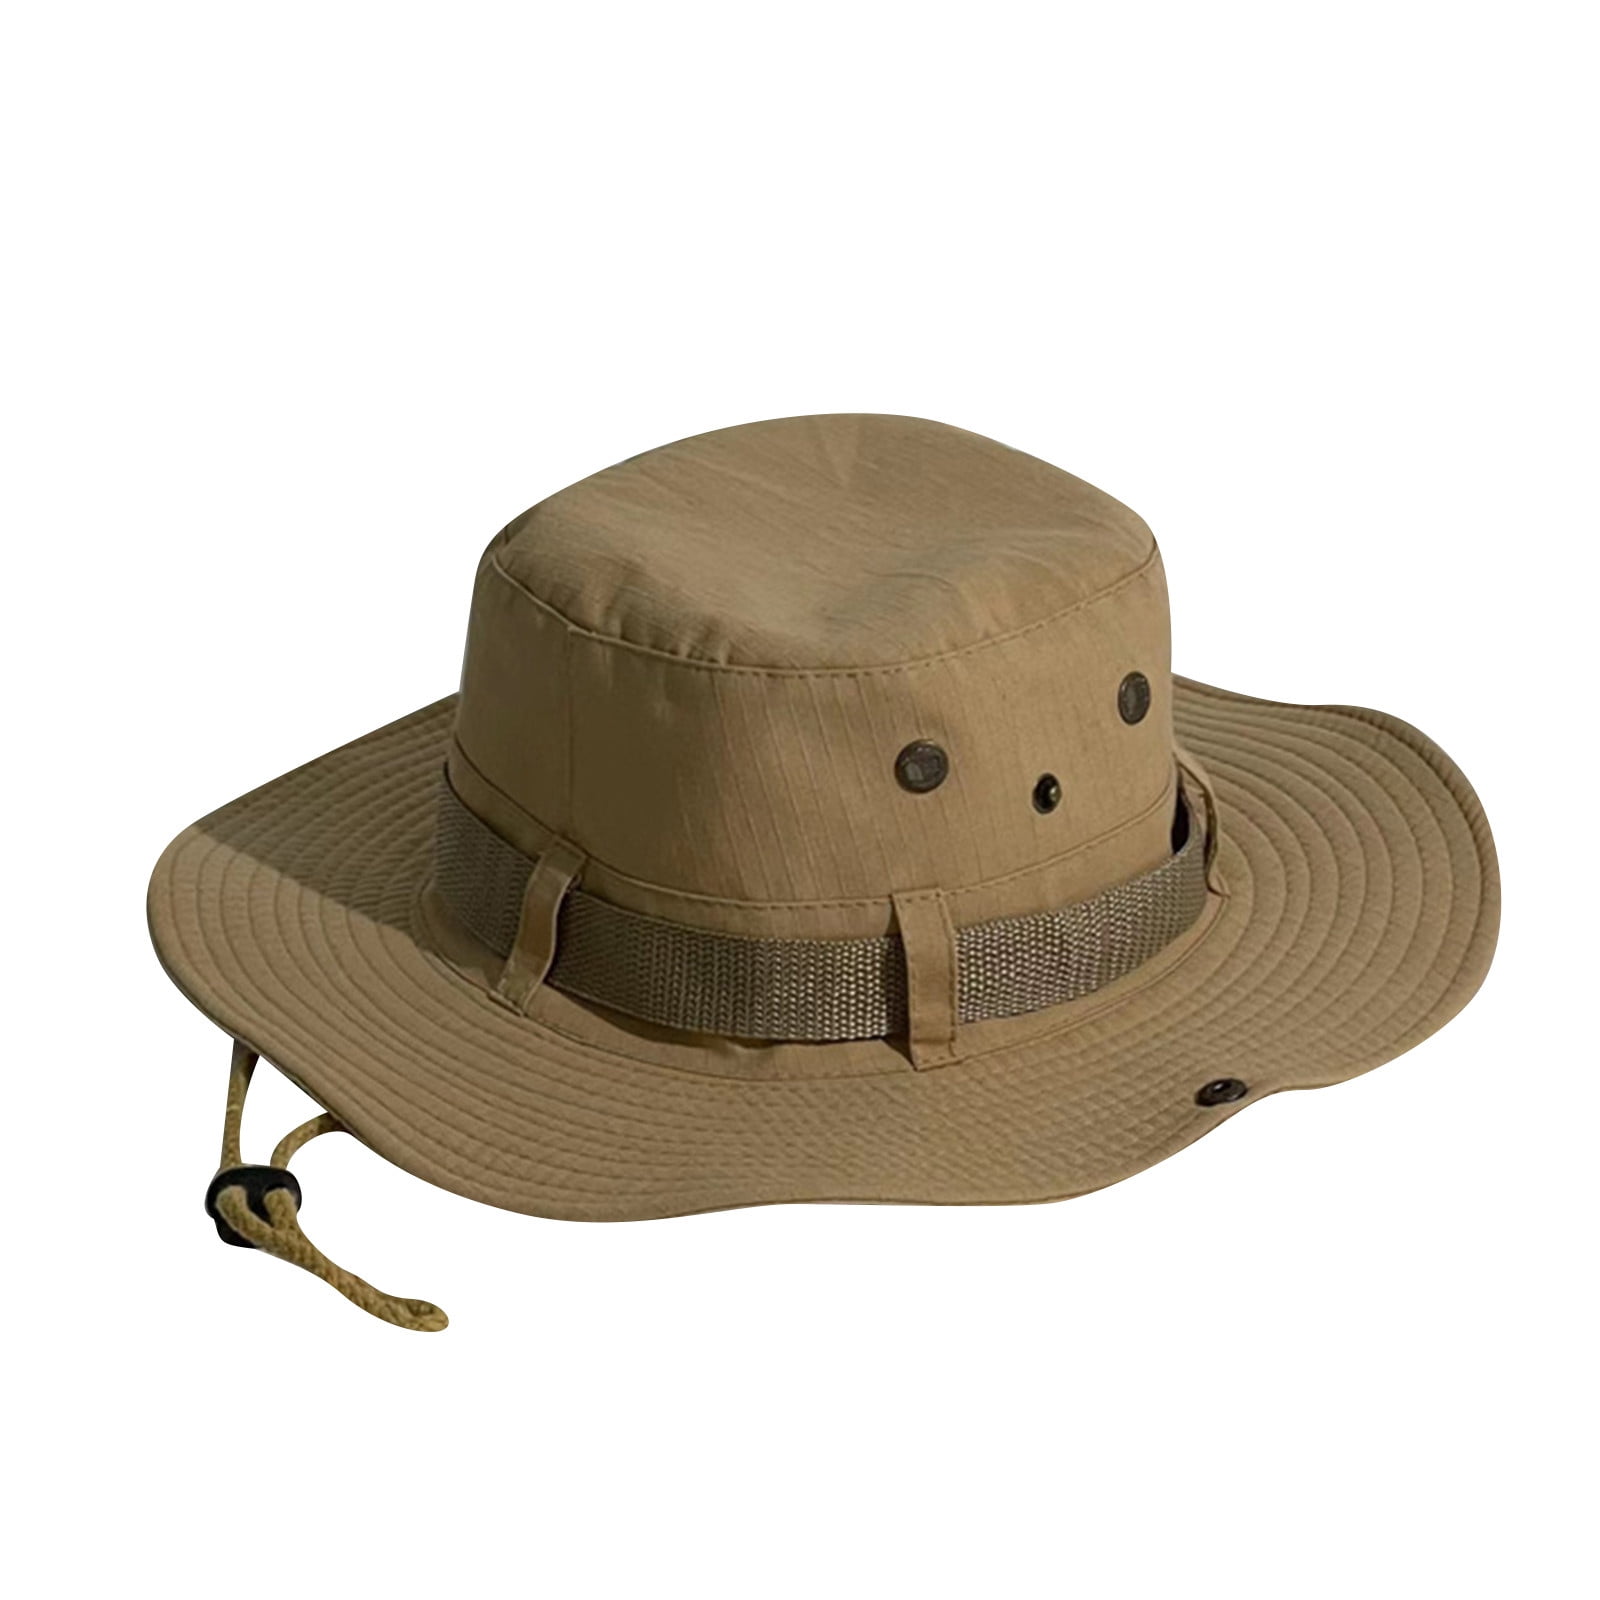 wofedyo Bucket Hat Mens And Womens Summer Leisure Outdoor Mountaineering Jungle  Sun Protection Big Brim Fishermans Hat Sun Hat Hat Hats For MenBeige 